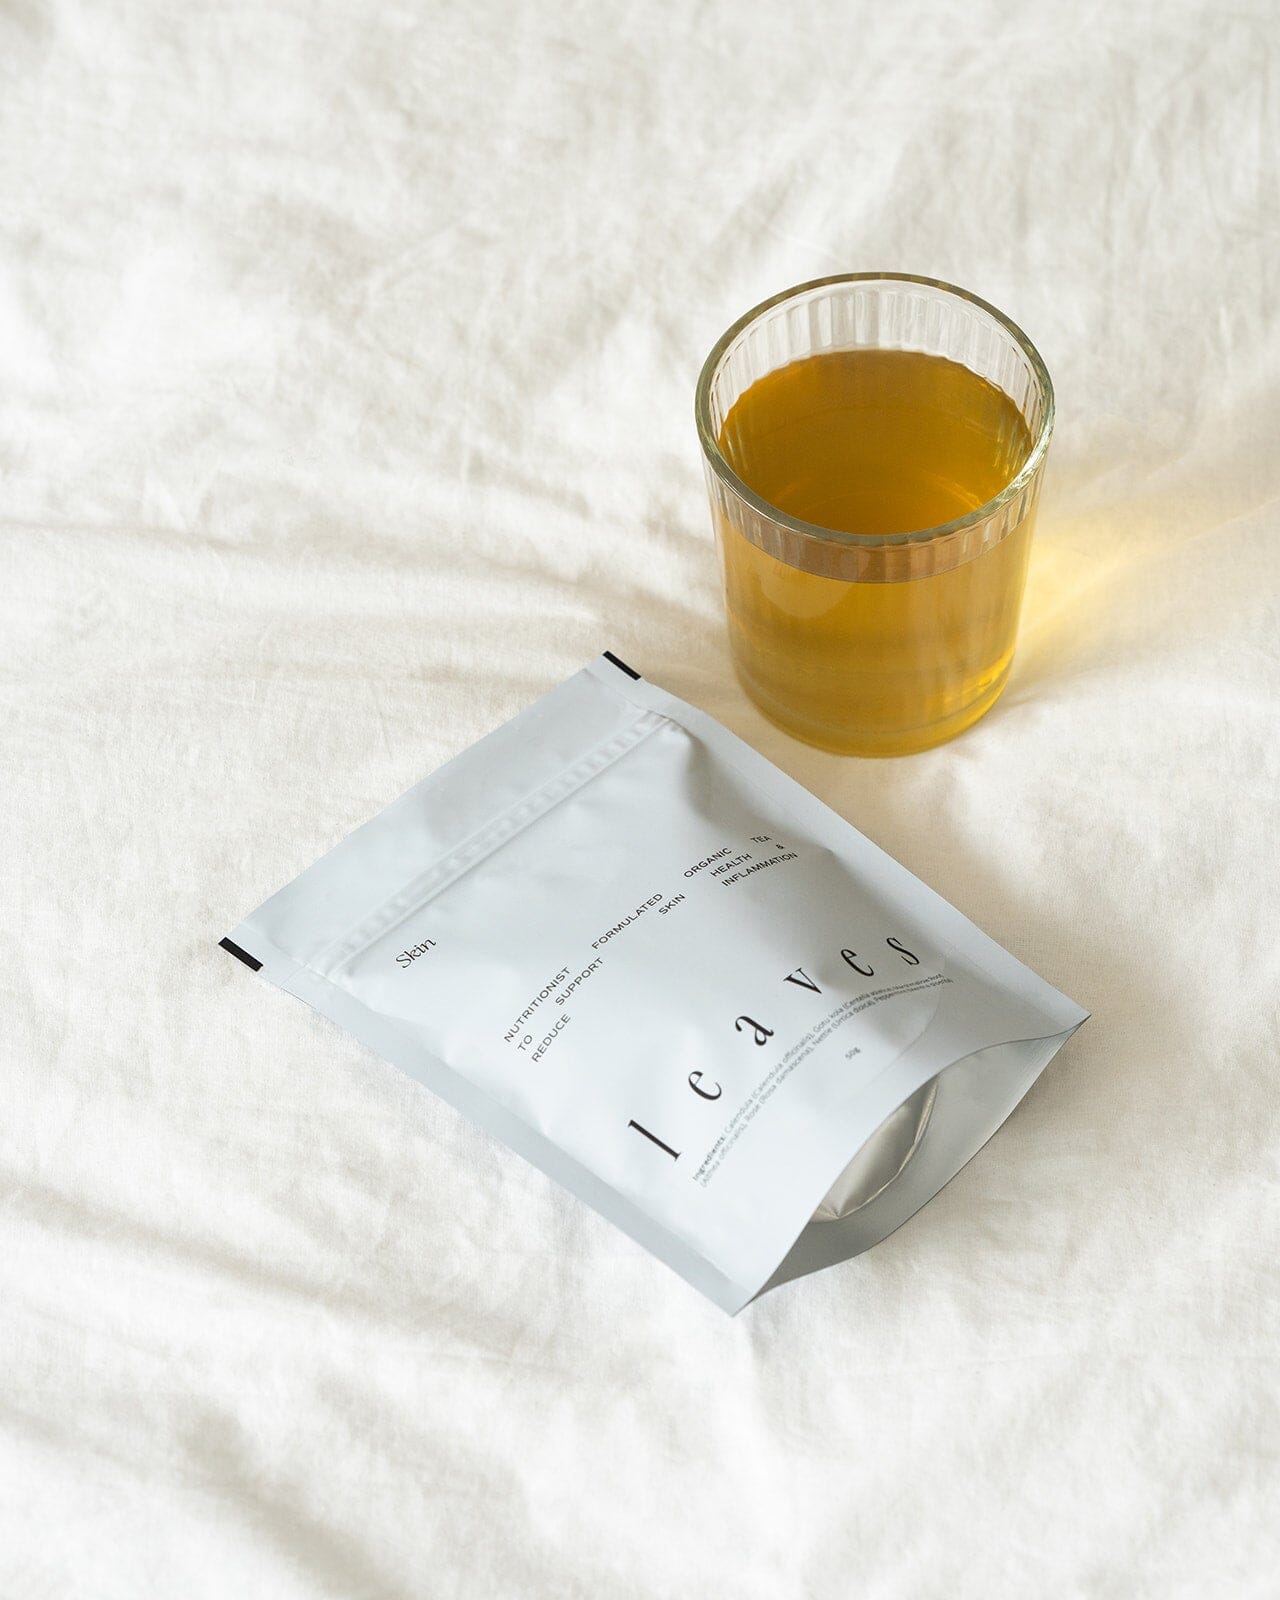 Skin leaves tea pouch laying down next to a cup of tea